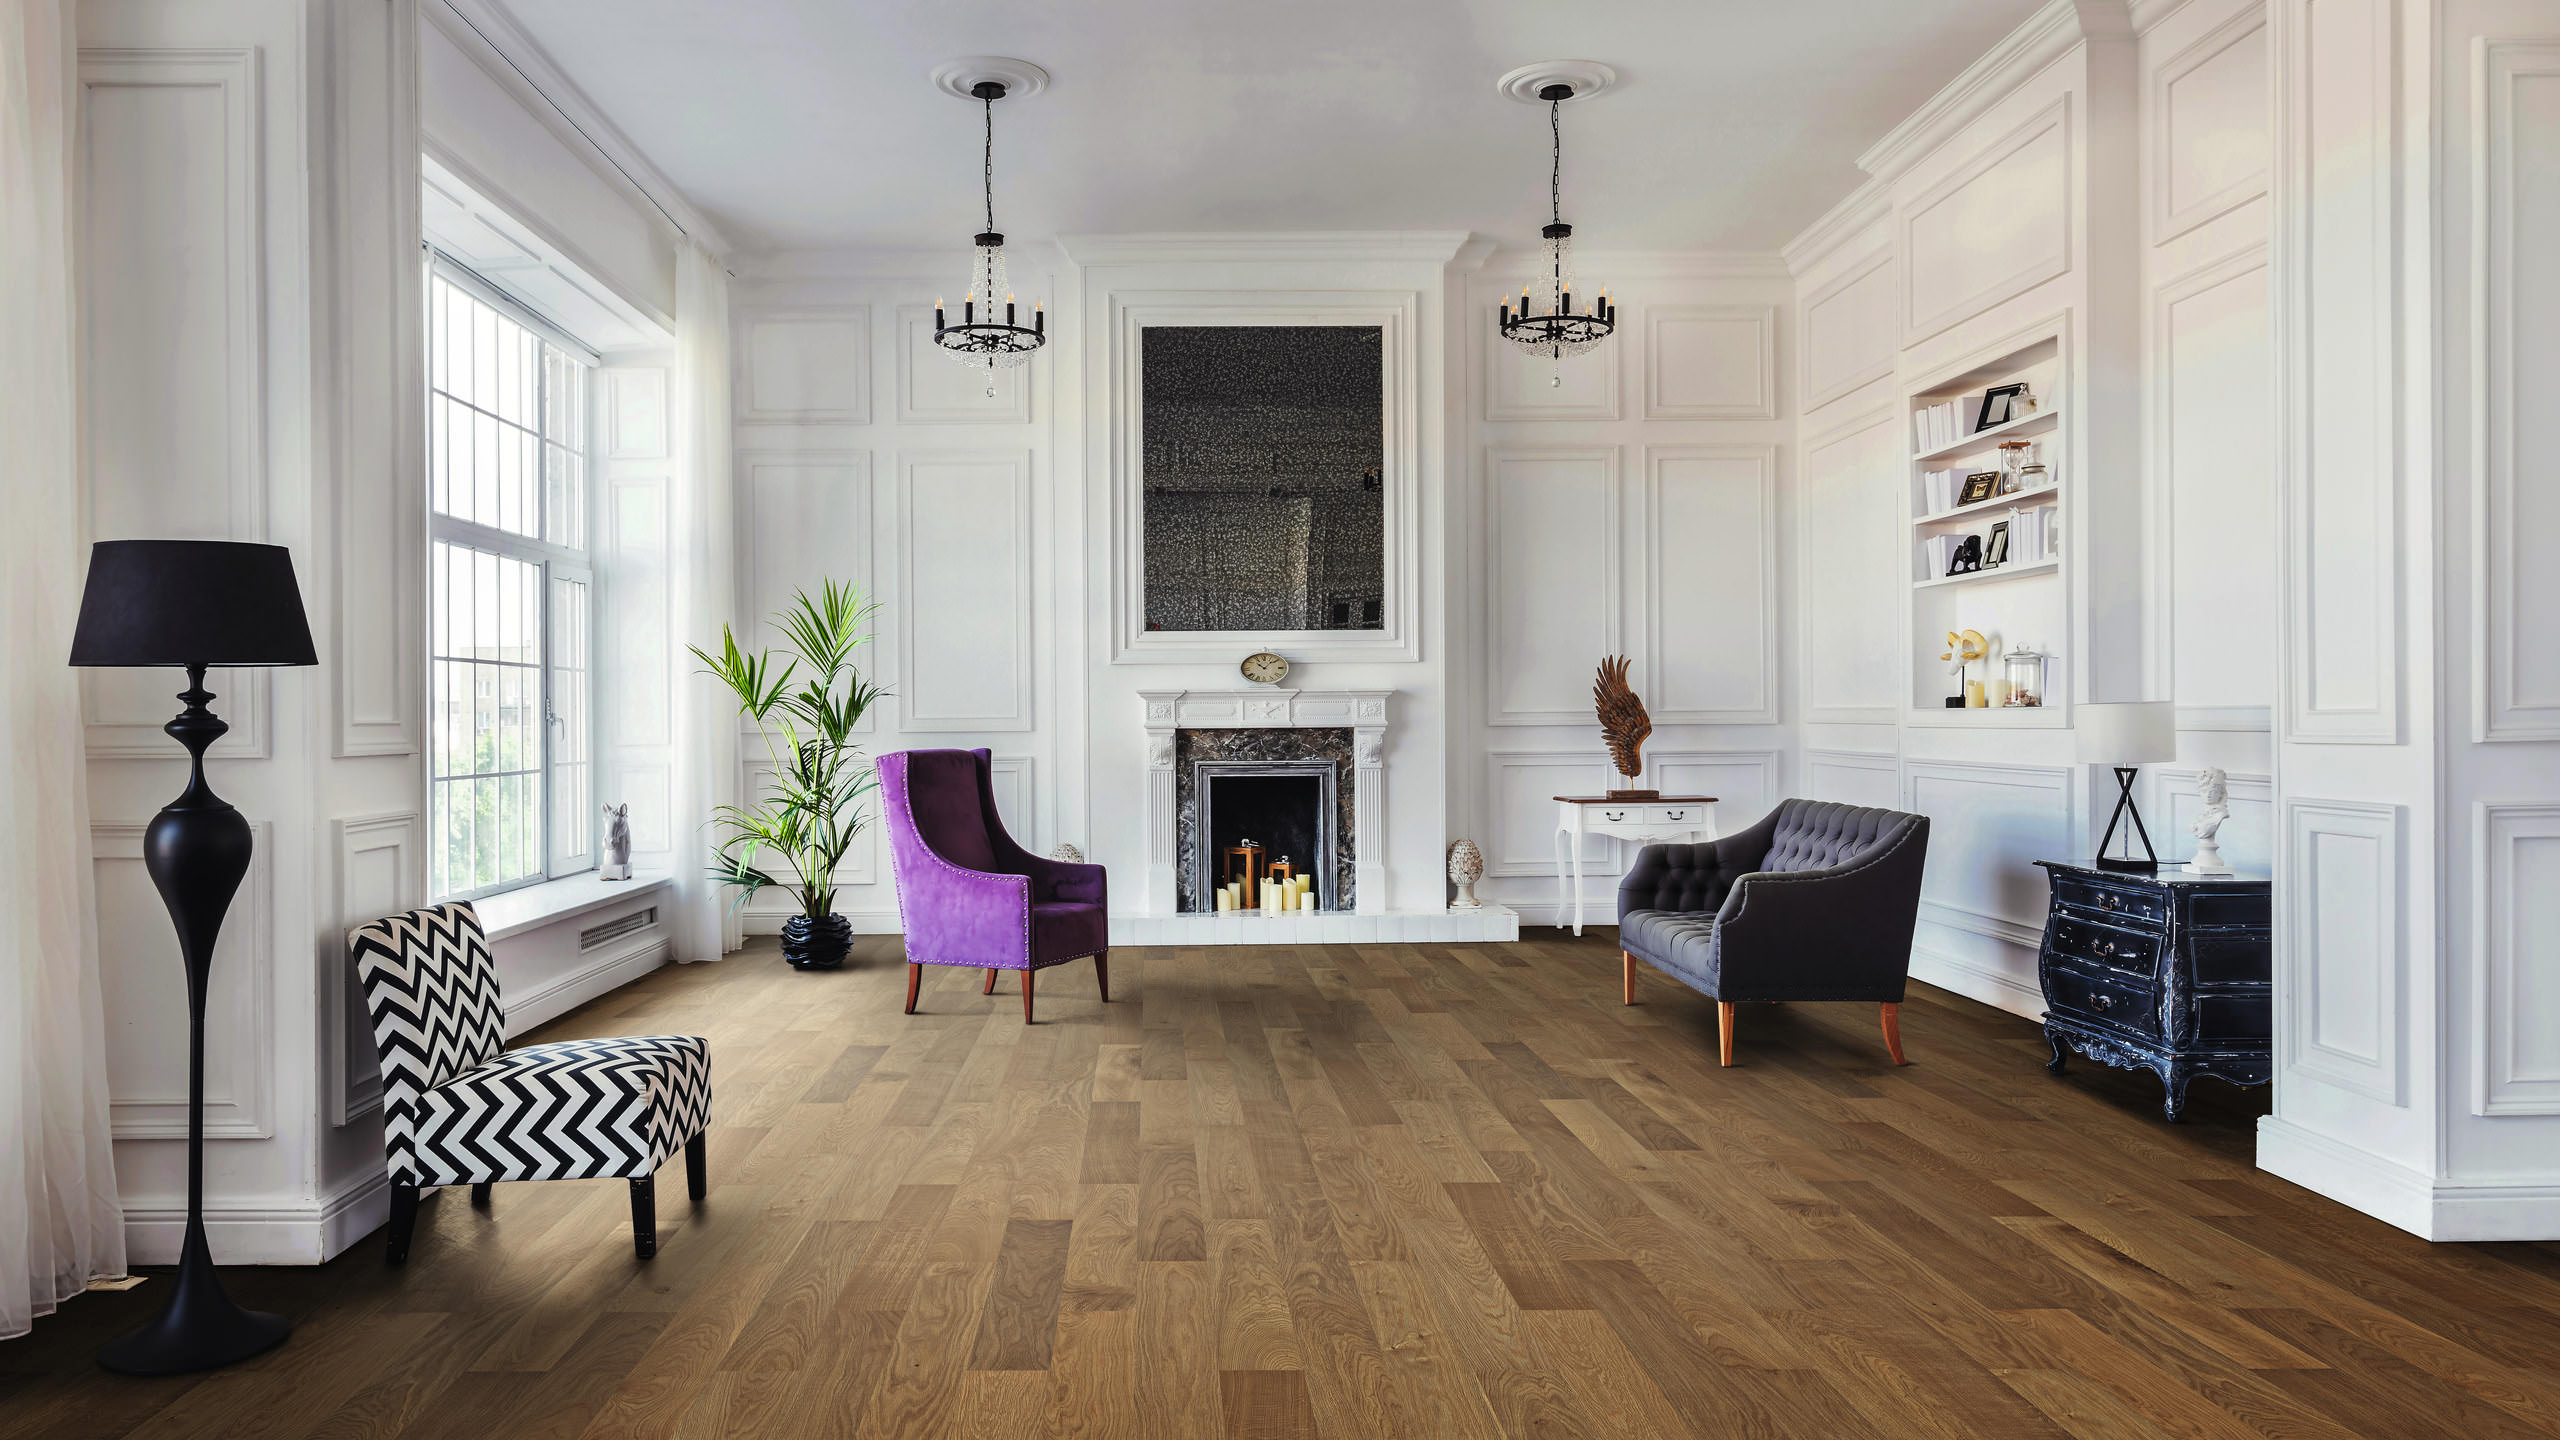 HARO PARQUET 4000 Plank 1-Strip Prestige Smoked Oak Markant brushed naturaLin plus Tongue and Groove